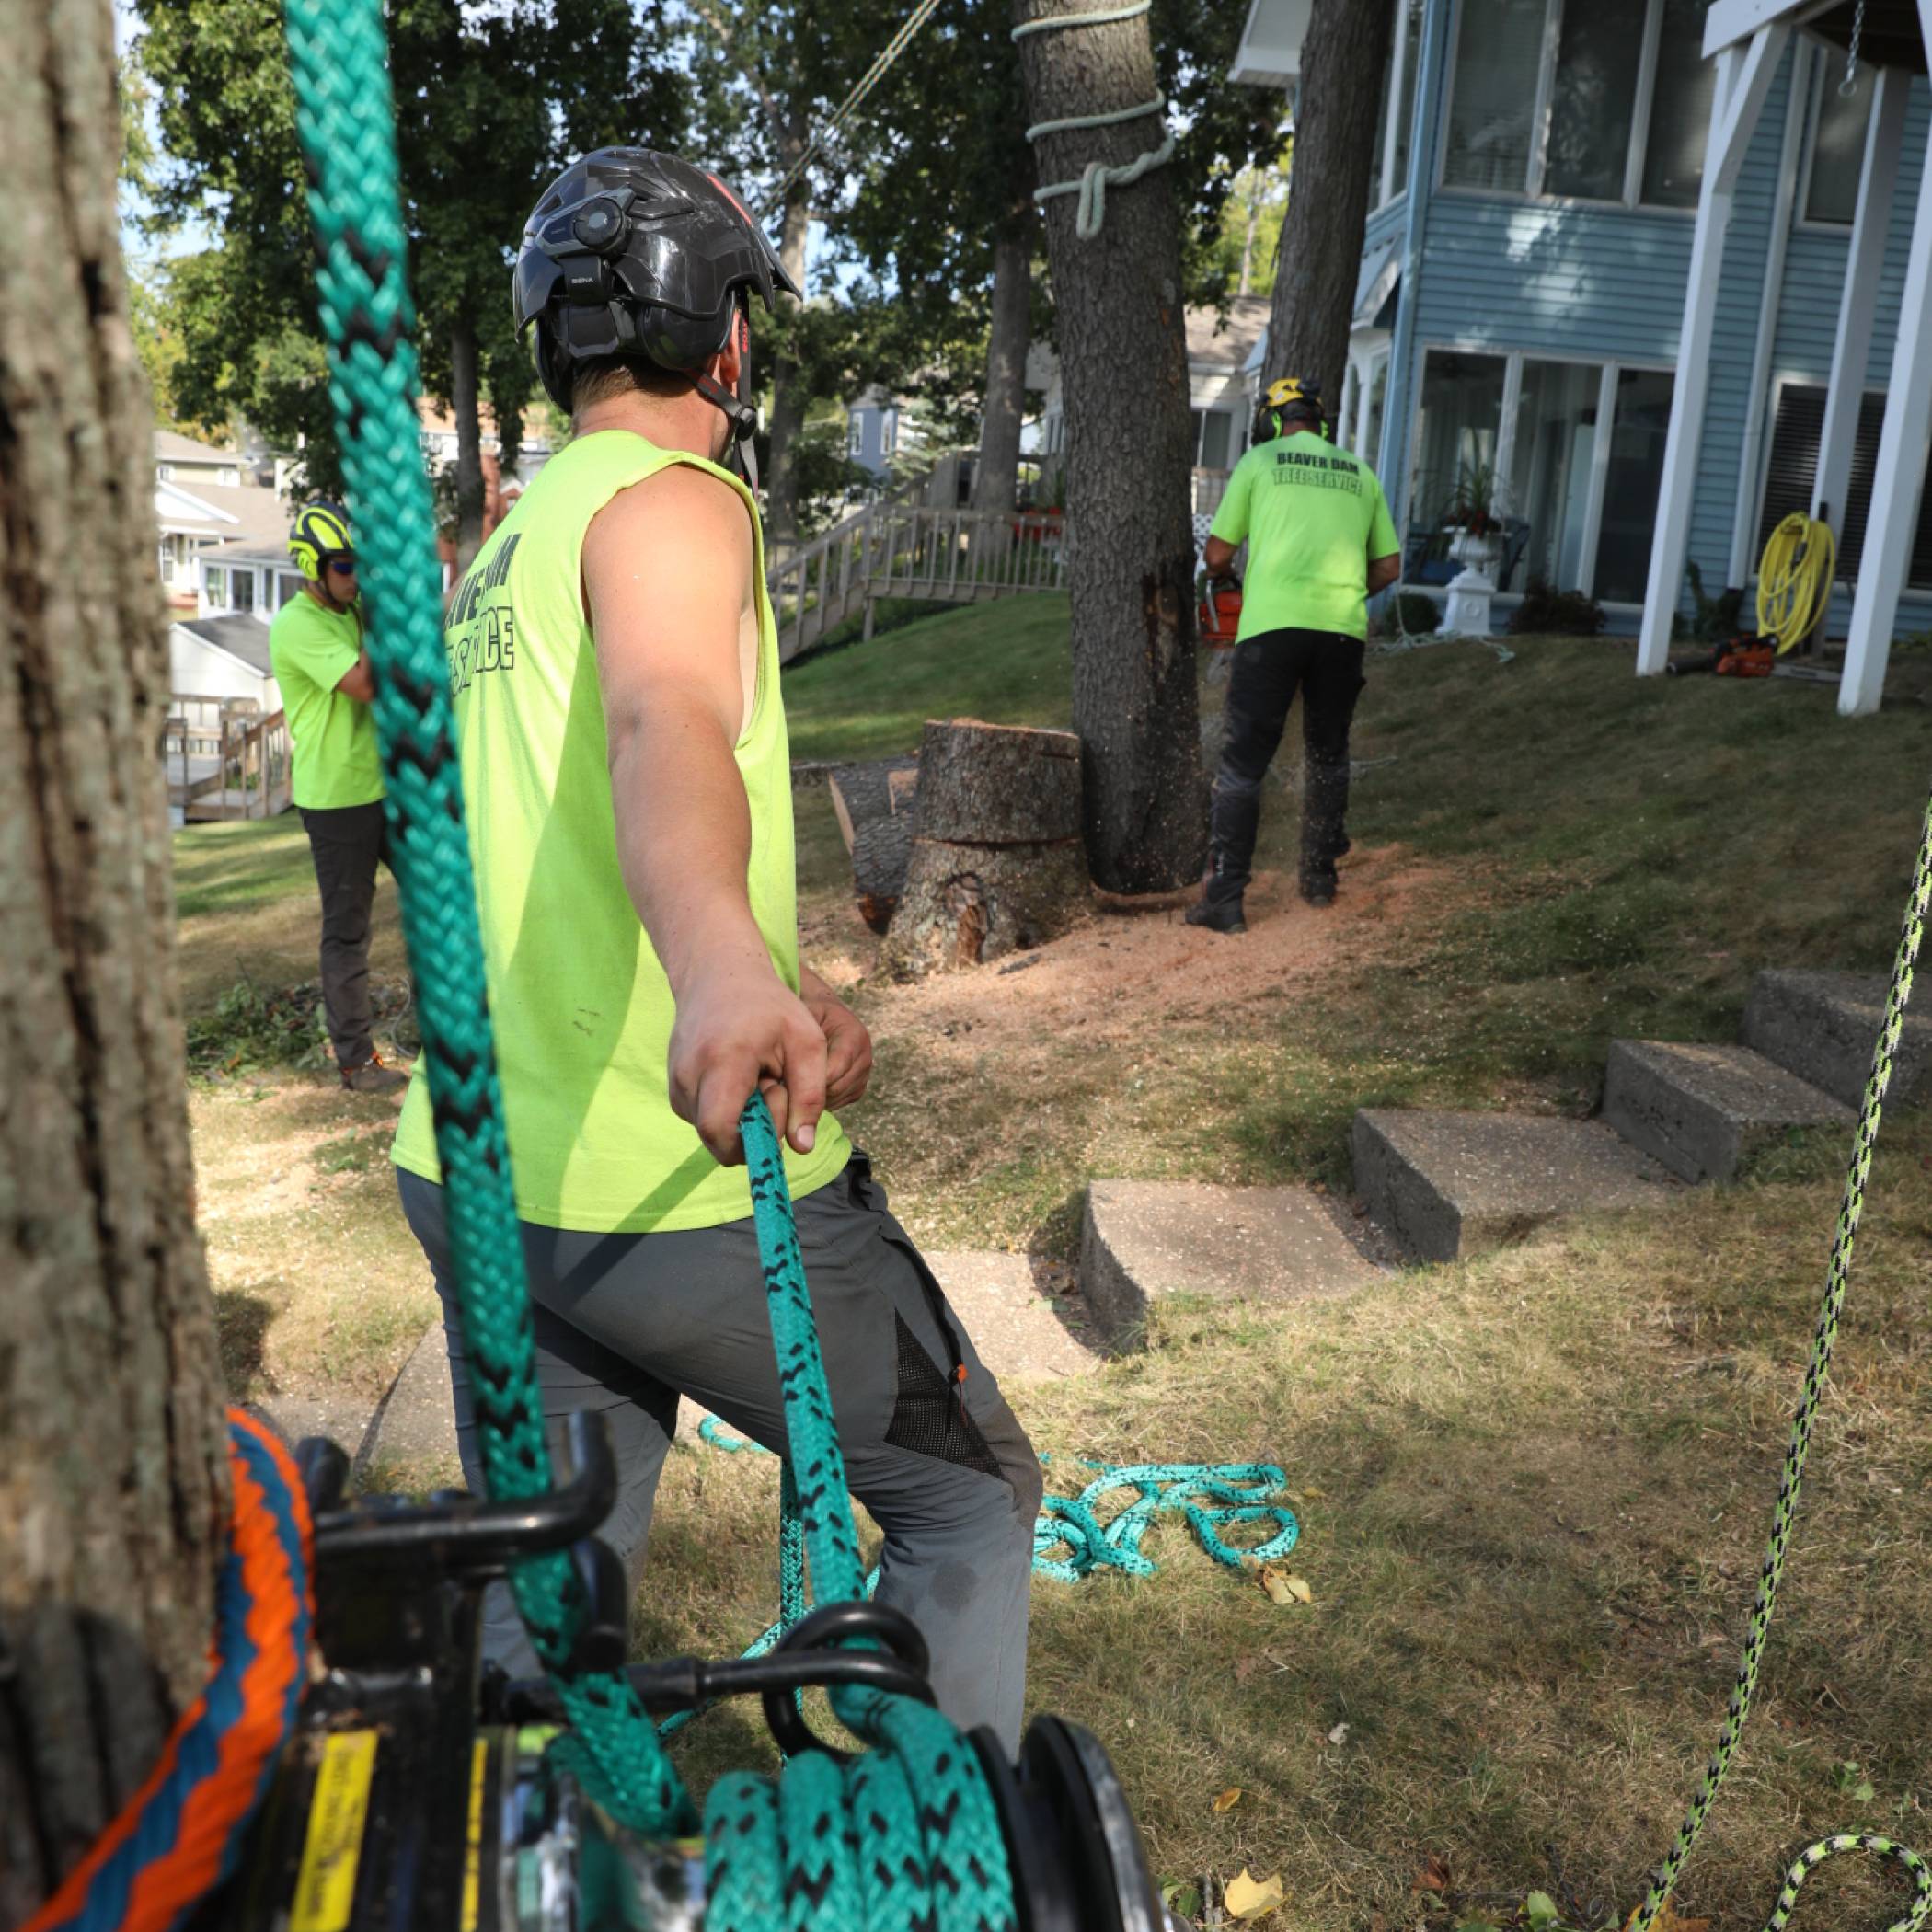 Beaver Dam Tree Service employees working with ropes and cables to remove a tree.